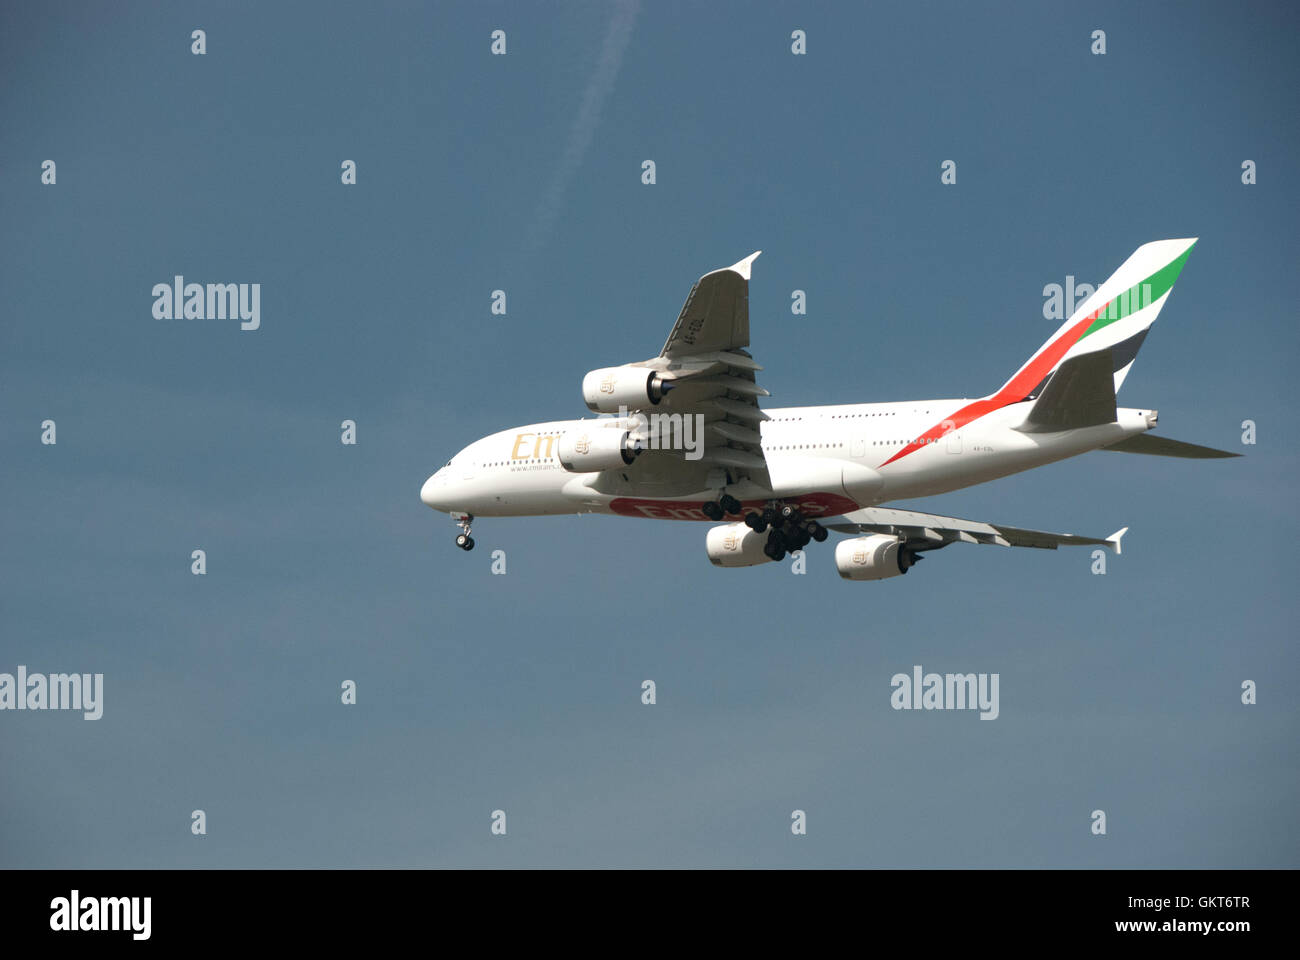 Emirates A380 landing at Manchester Airport Stock Photo